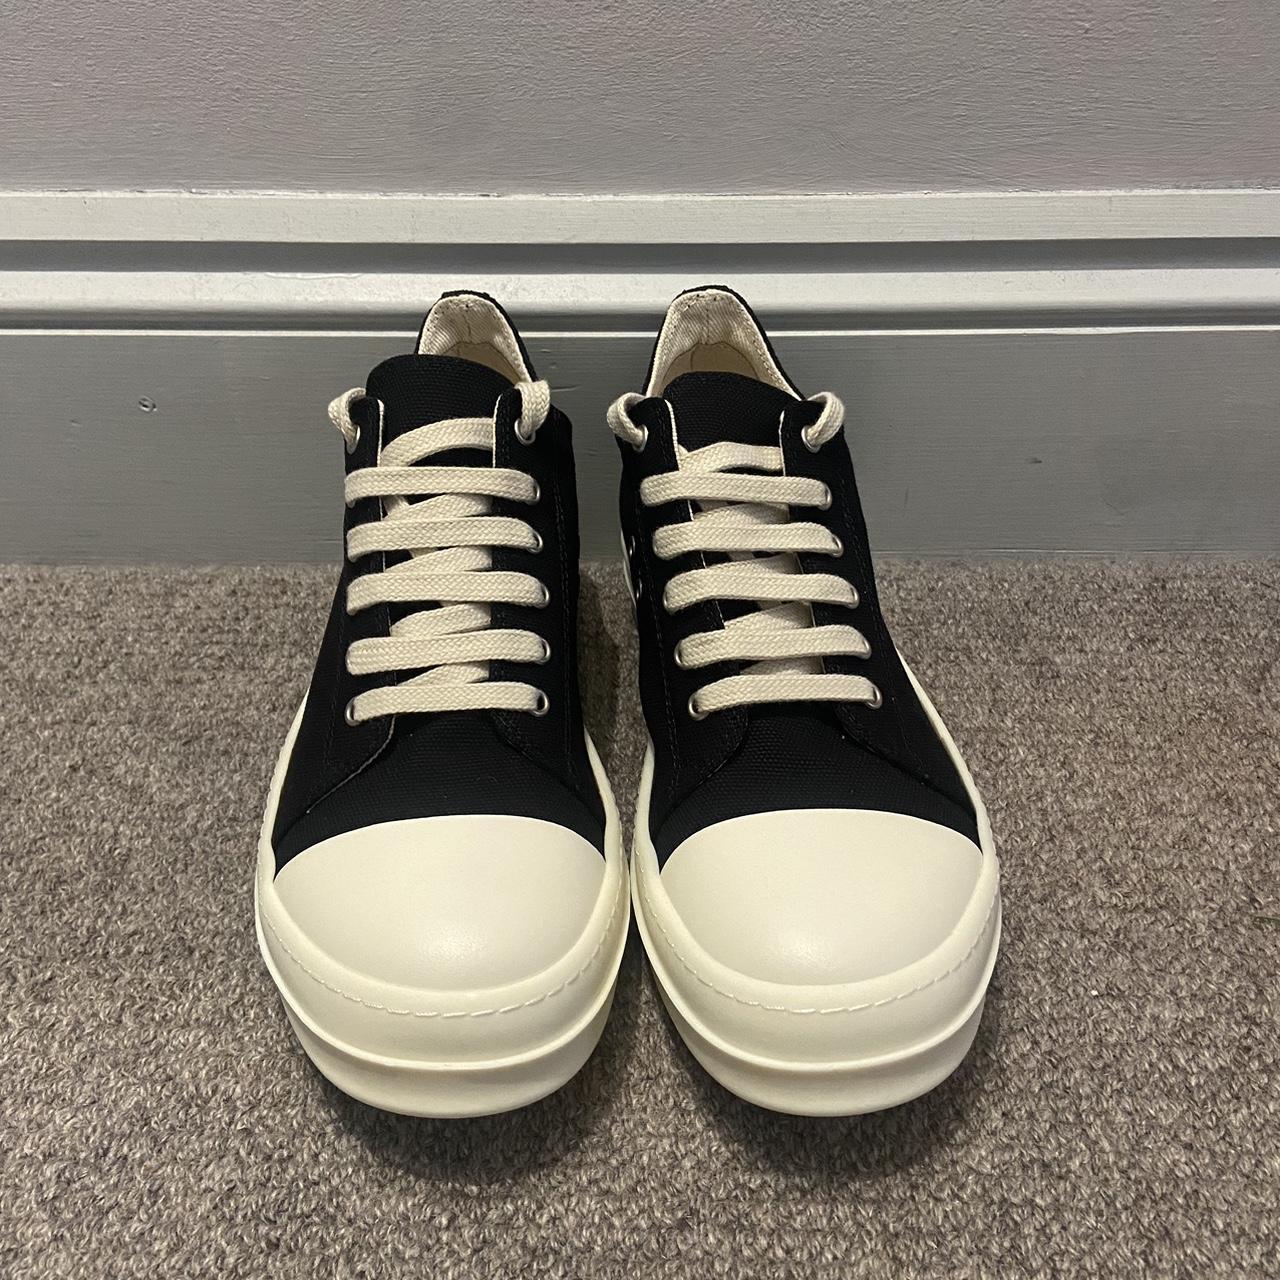 Men's Black and White Trainers | Depop